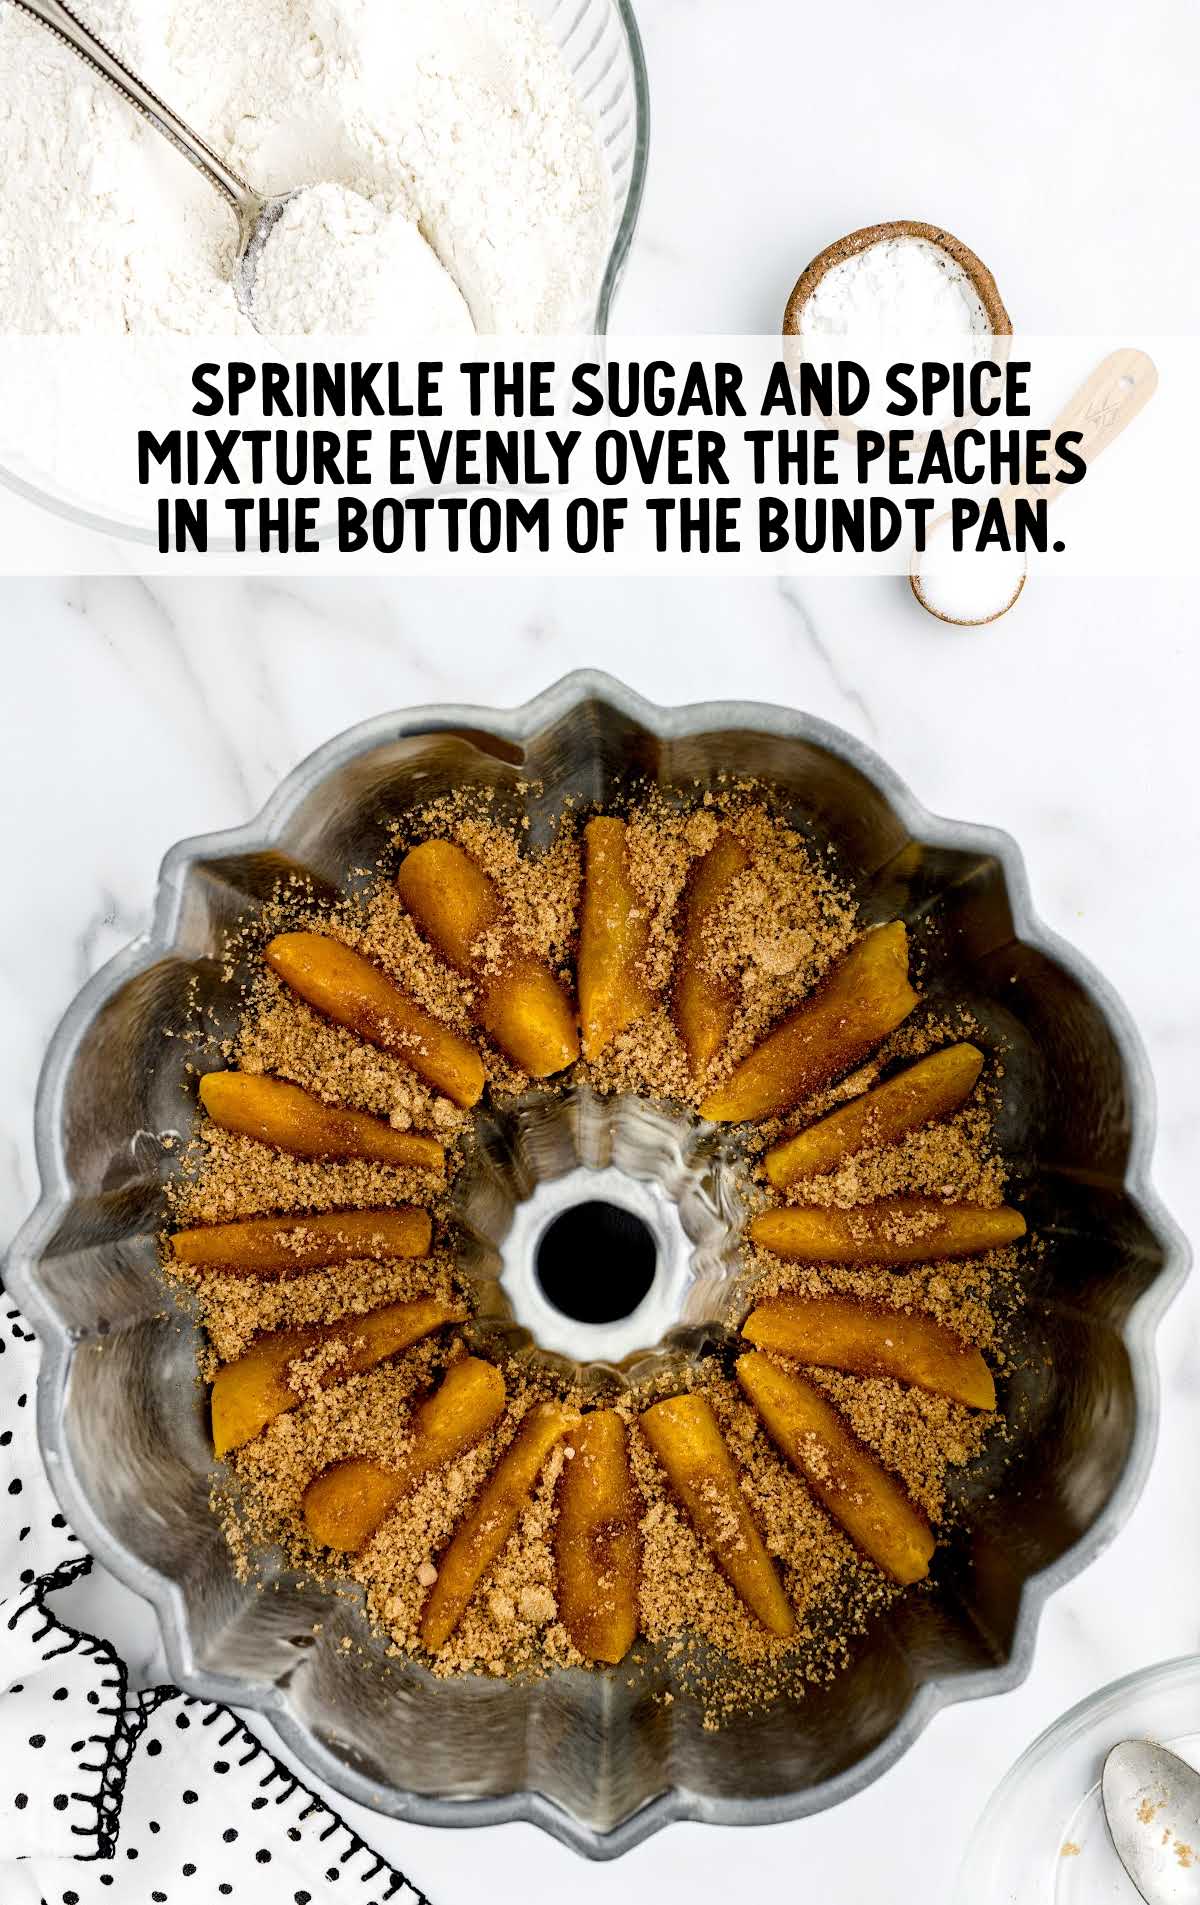 sugar and spice mixture sprinkled in the bottom of the bundt pan